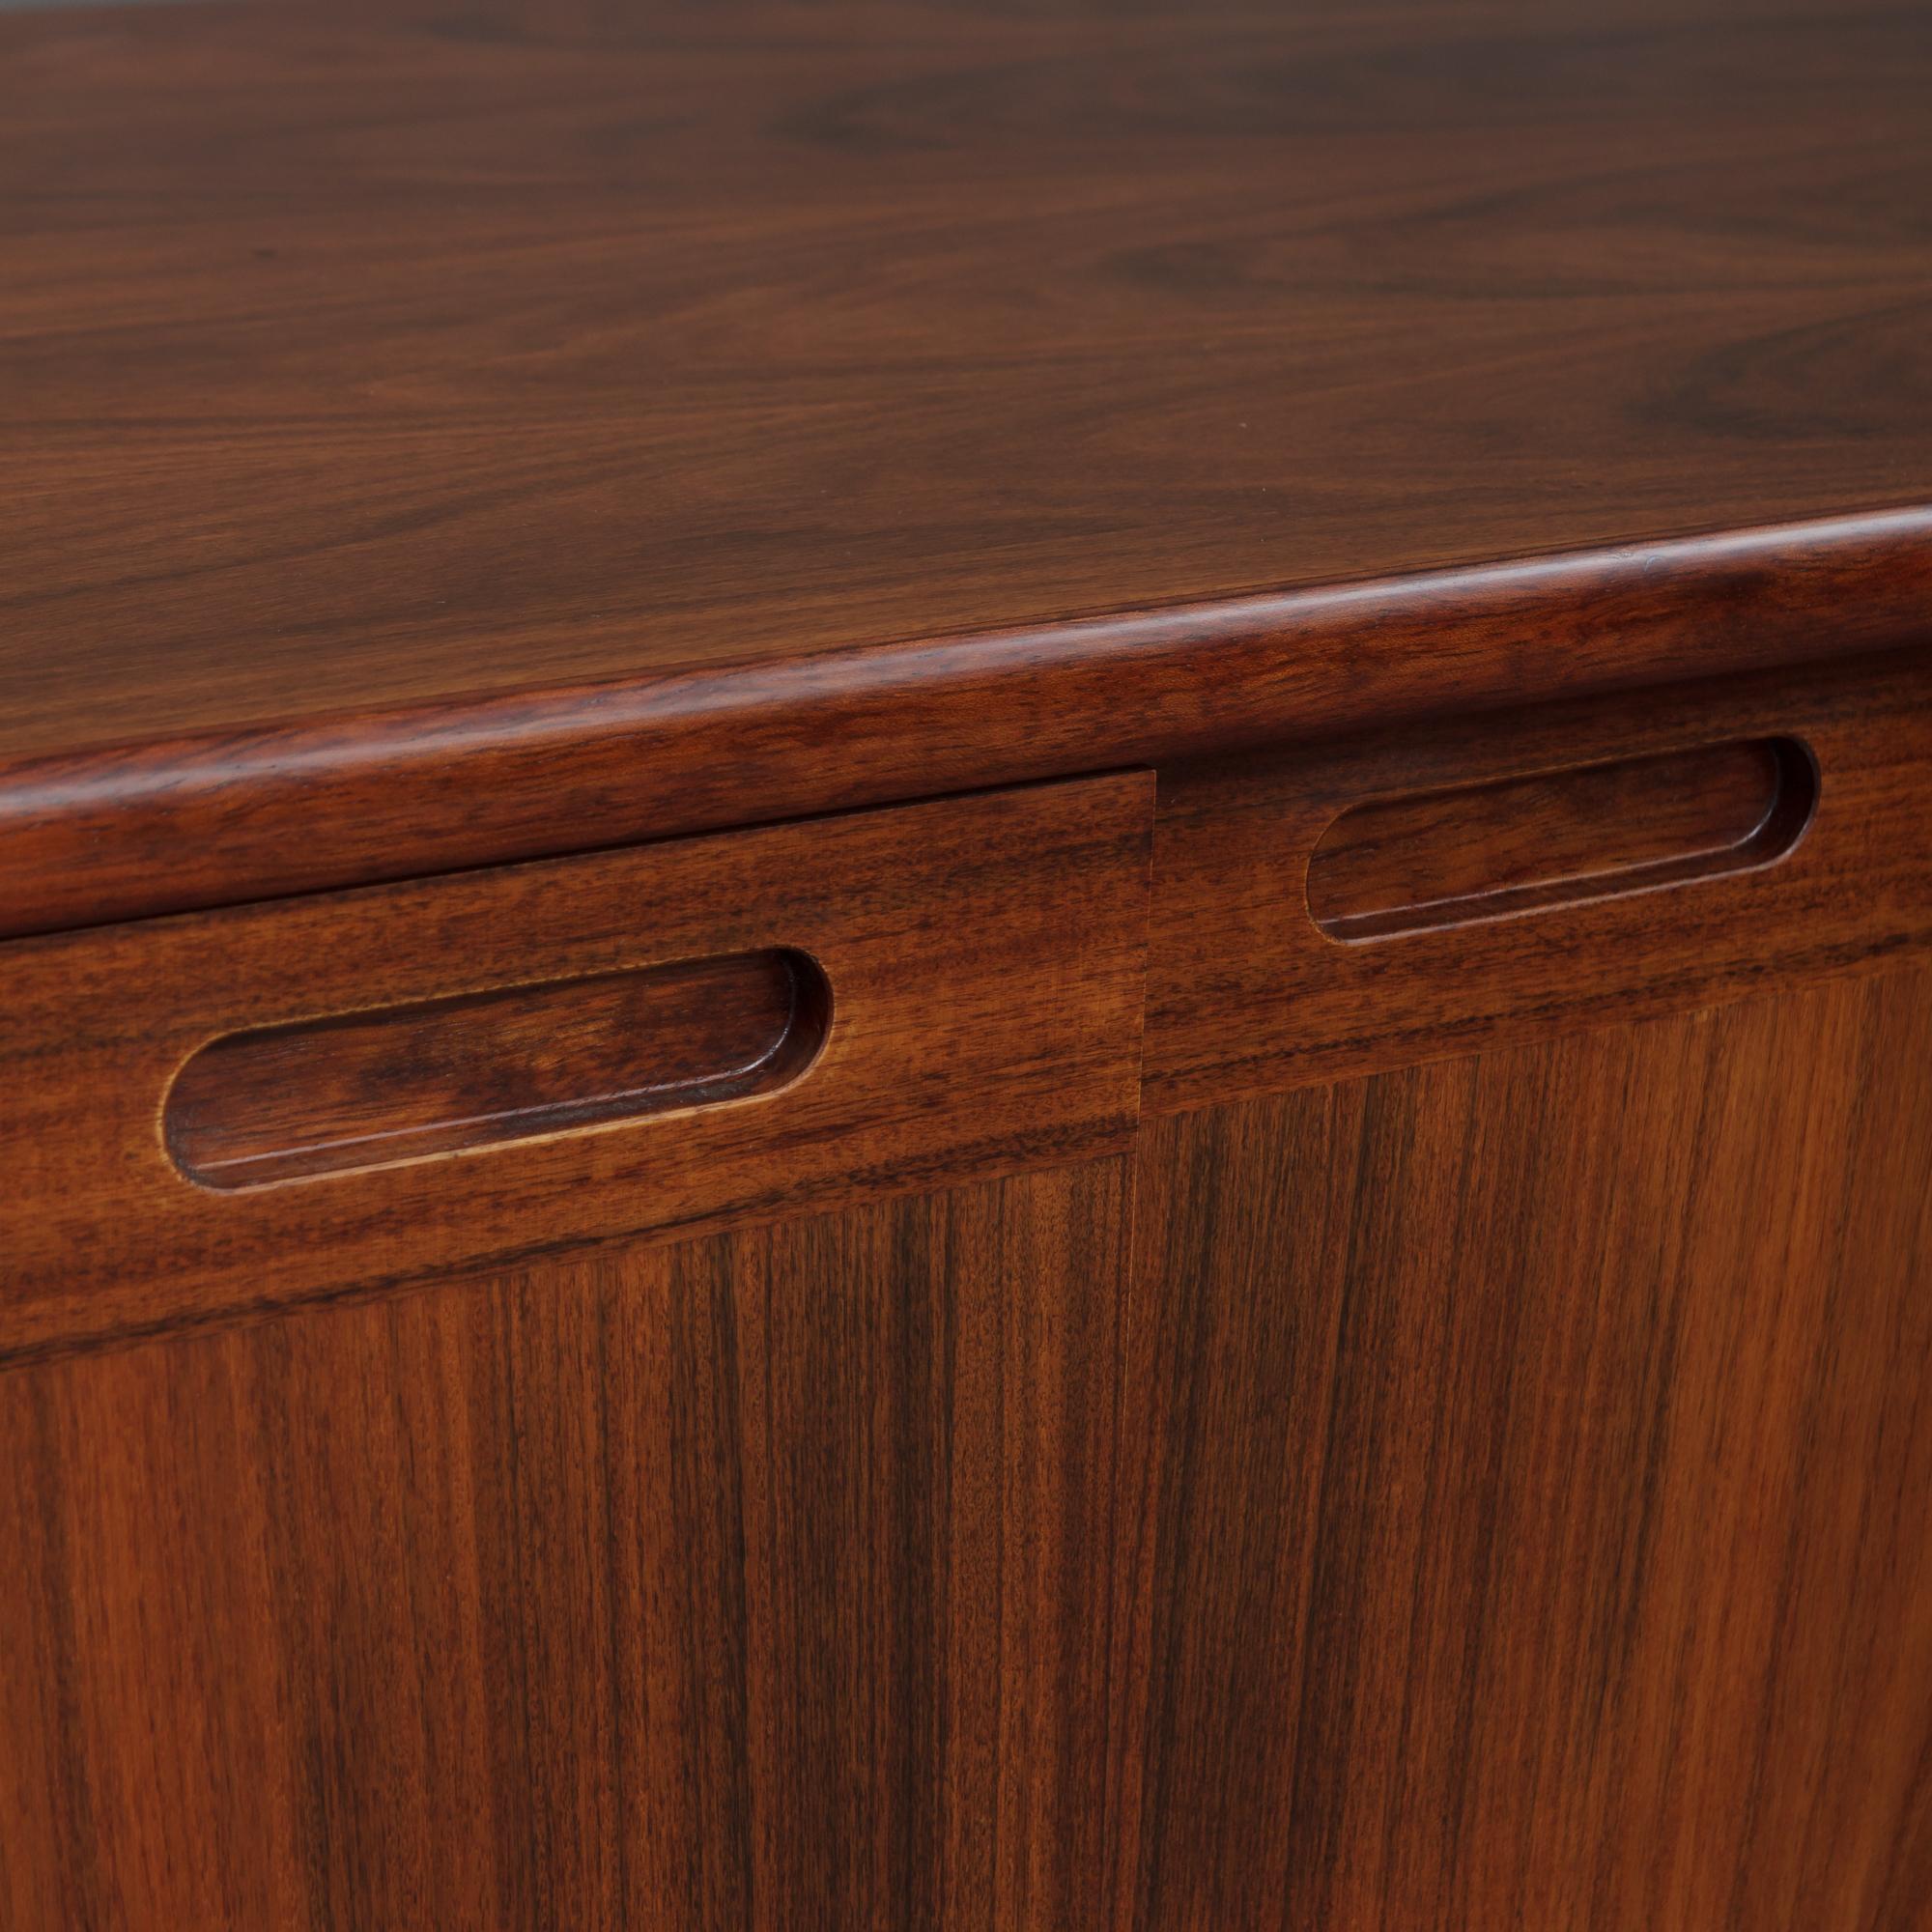  Danish Rosewood Sideboard by Skovby In Good Condition For Sale In Warsaw, PL